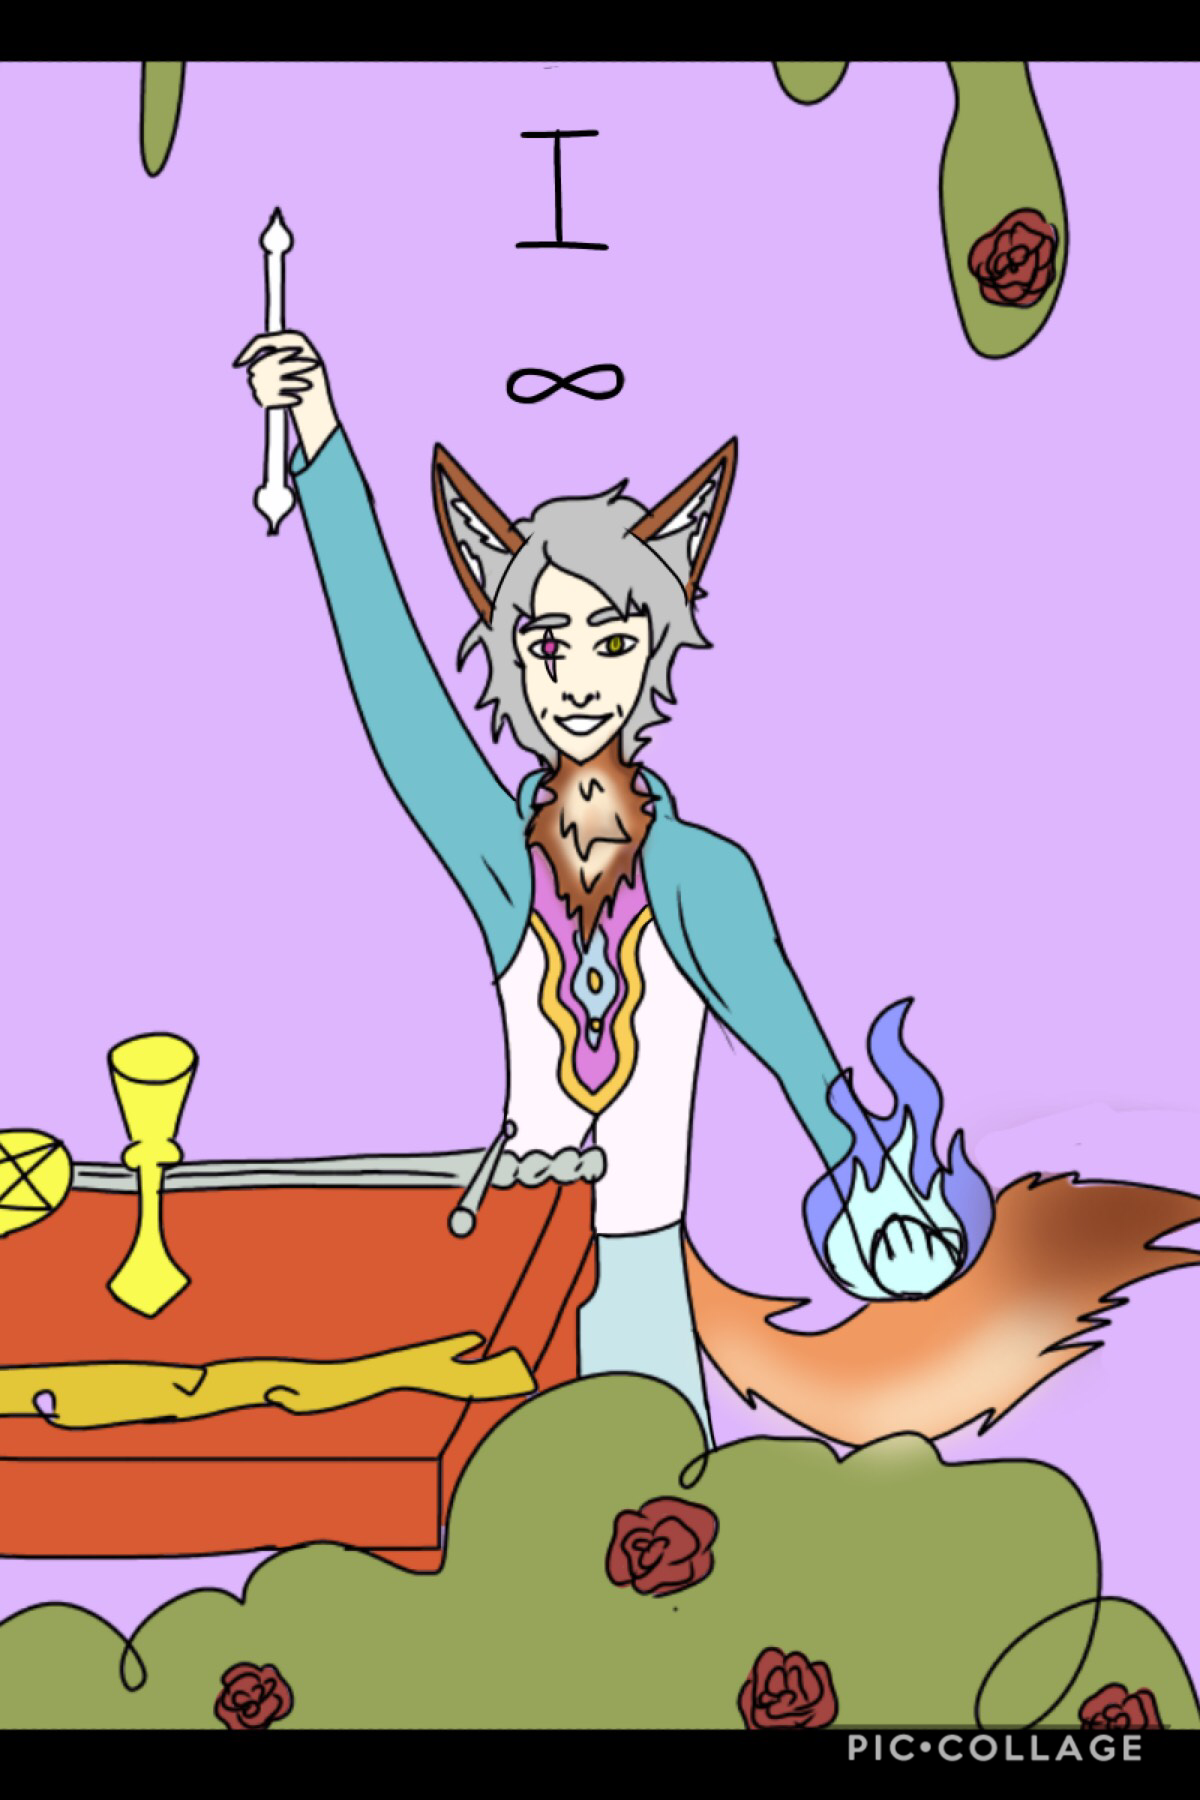 tap
what is wrong w my art, my coloring is gross and my anatomy is just...i haven't drawn in a while if you couldn't tell hah. but here i tried to implement zysto in the magician tarot's card which ill remix 